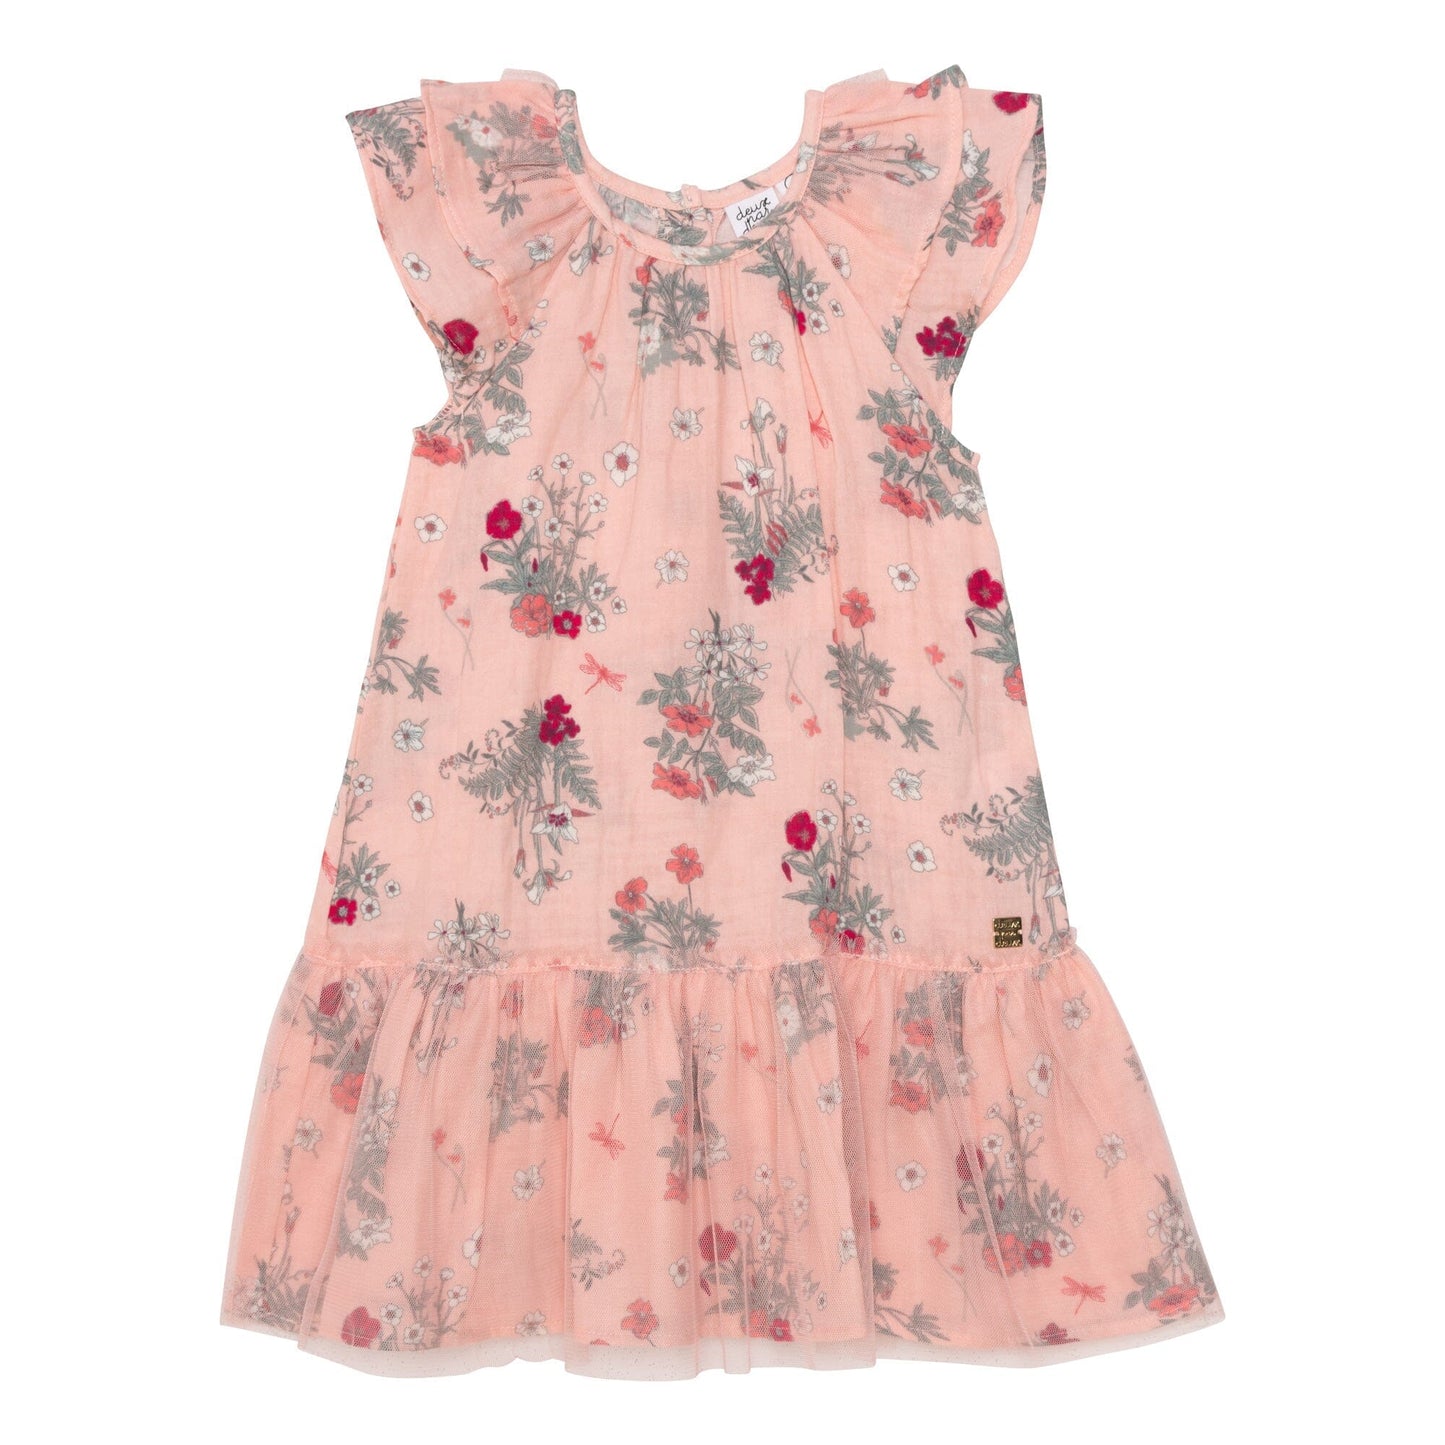 Printed Dress With Ruffle Sleeves Vintage Pink Botanical Flowers - E30H91_048